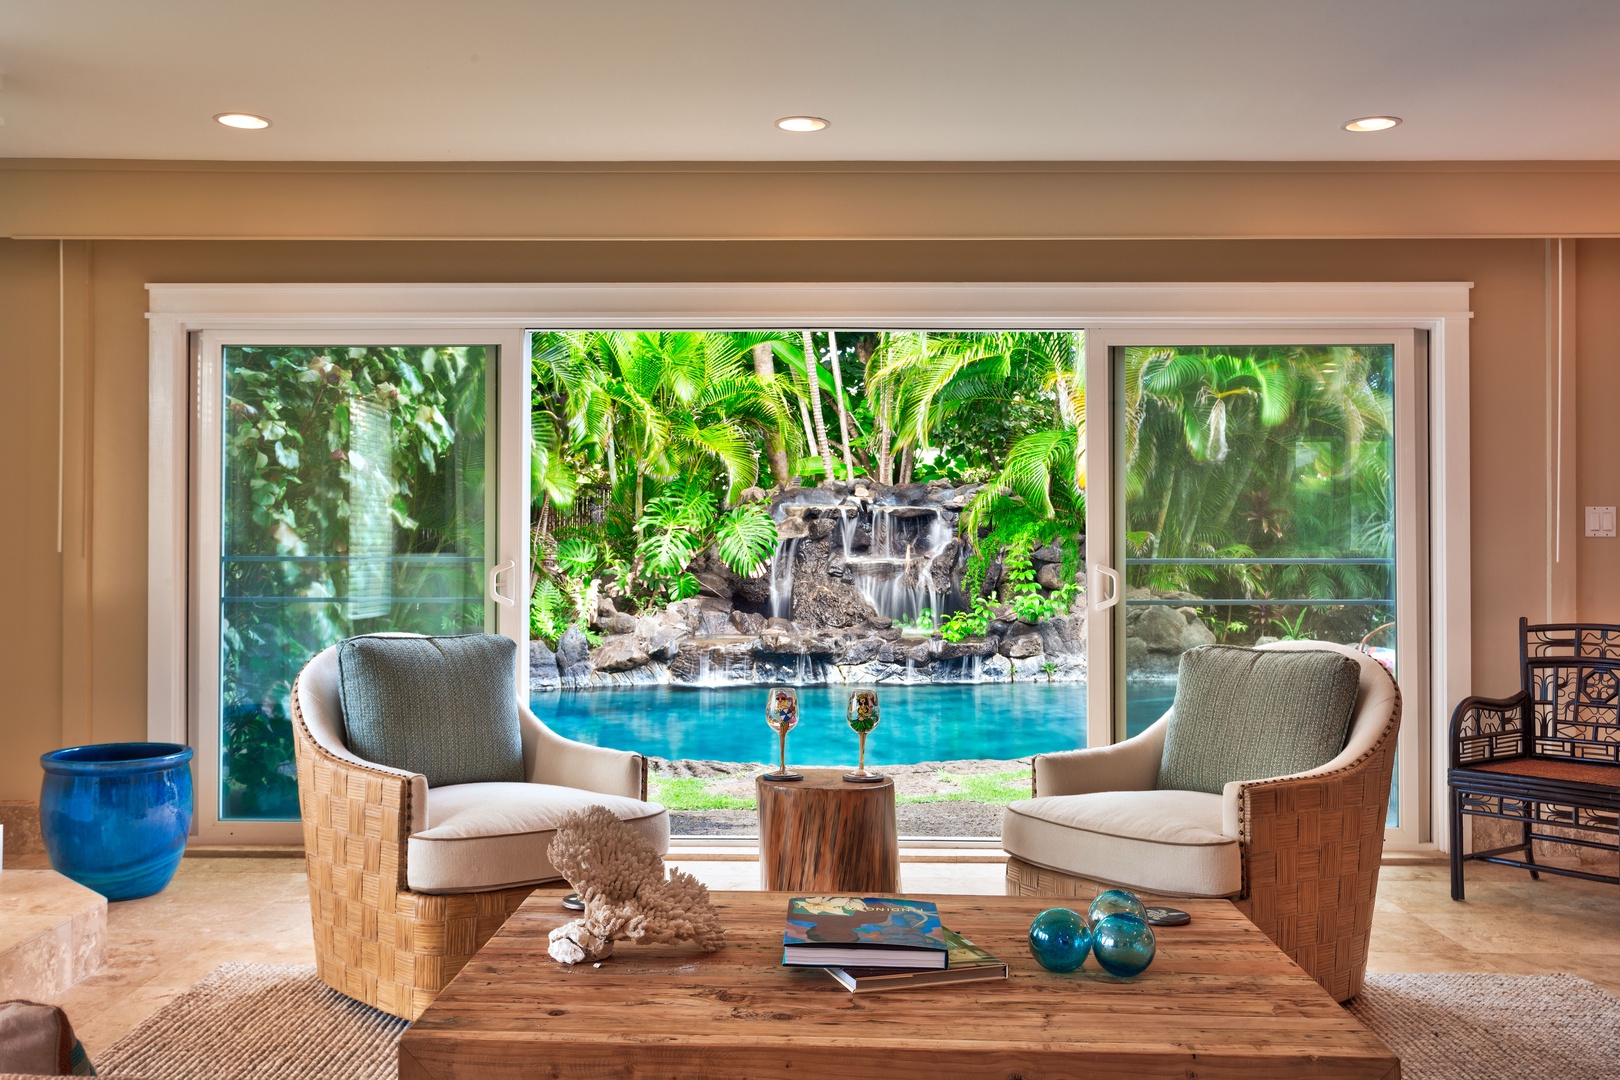 Kailua Vacation Rentals, Maluhia - Recline in the sitting room, immediately inside once you cross the threshold into the villa. The view is simply breathtaking.